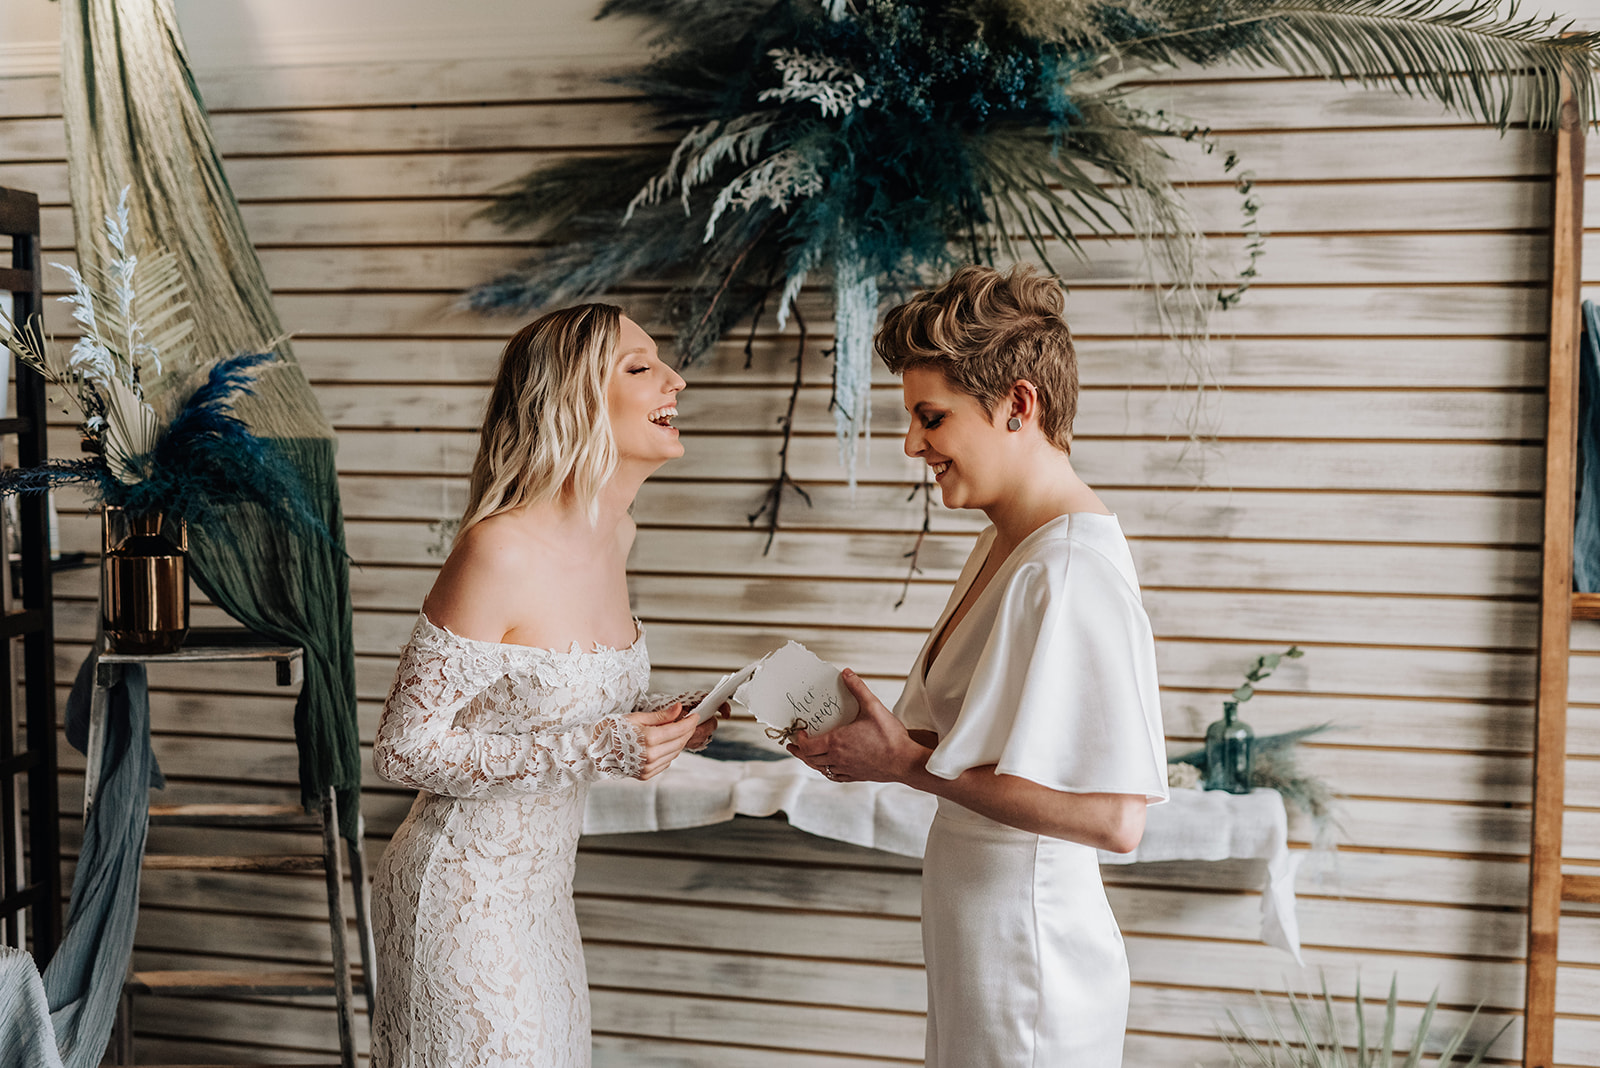 Brides share a laugh as they exchange wedding vows for their blue bohemian wedding ceremony